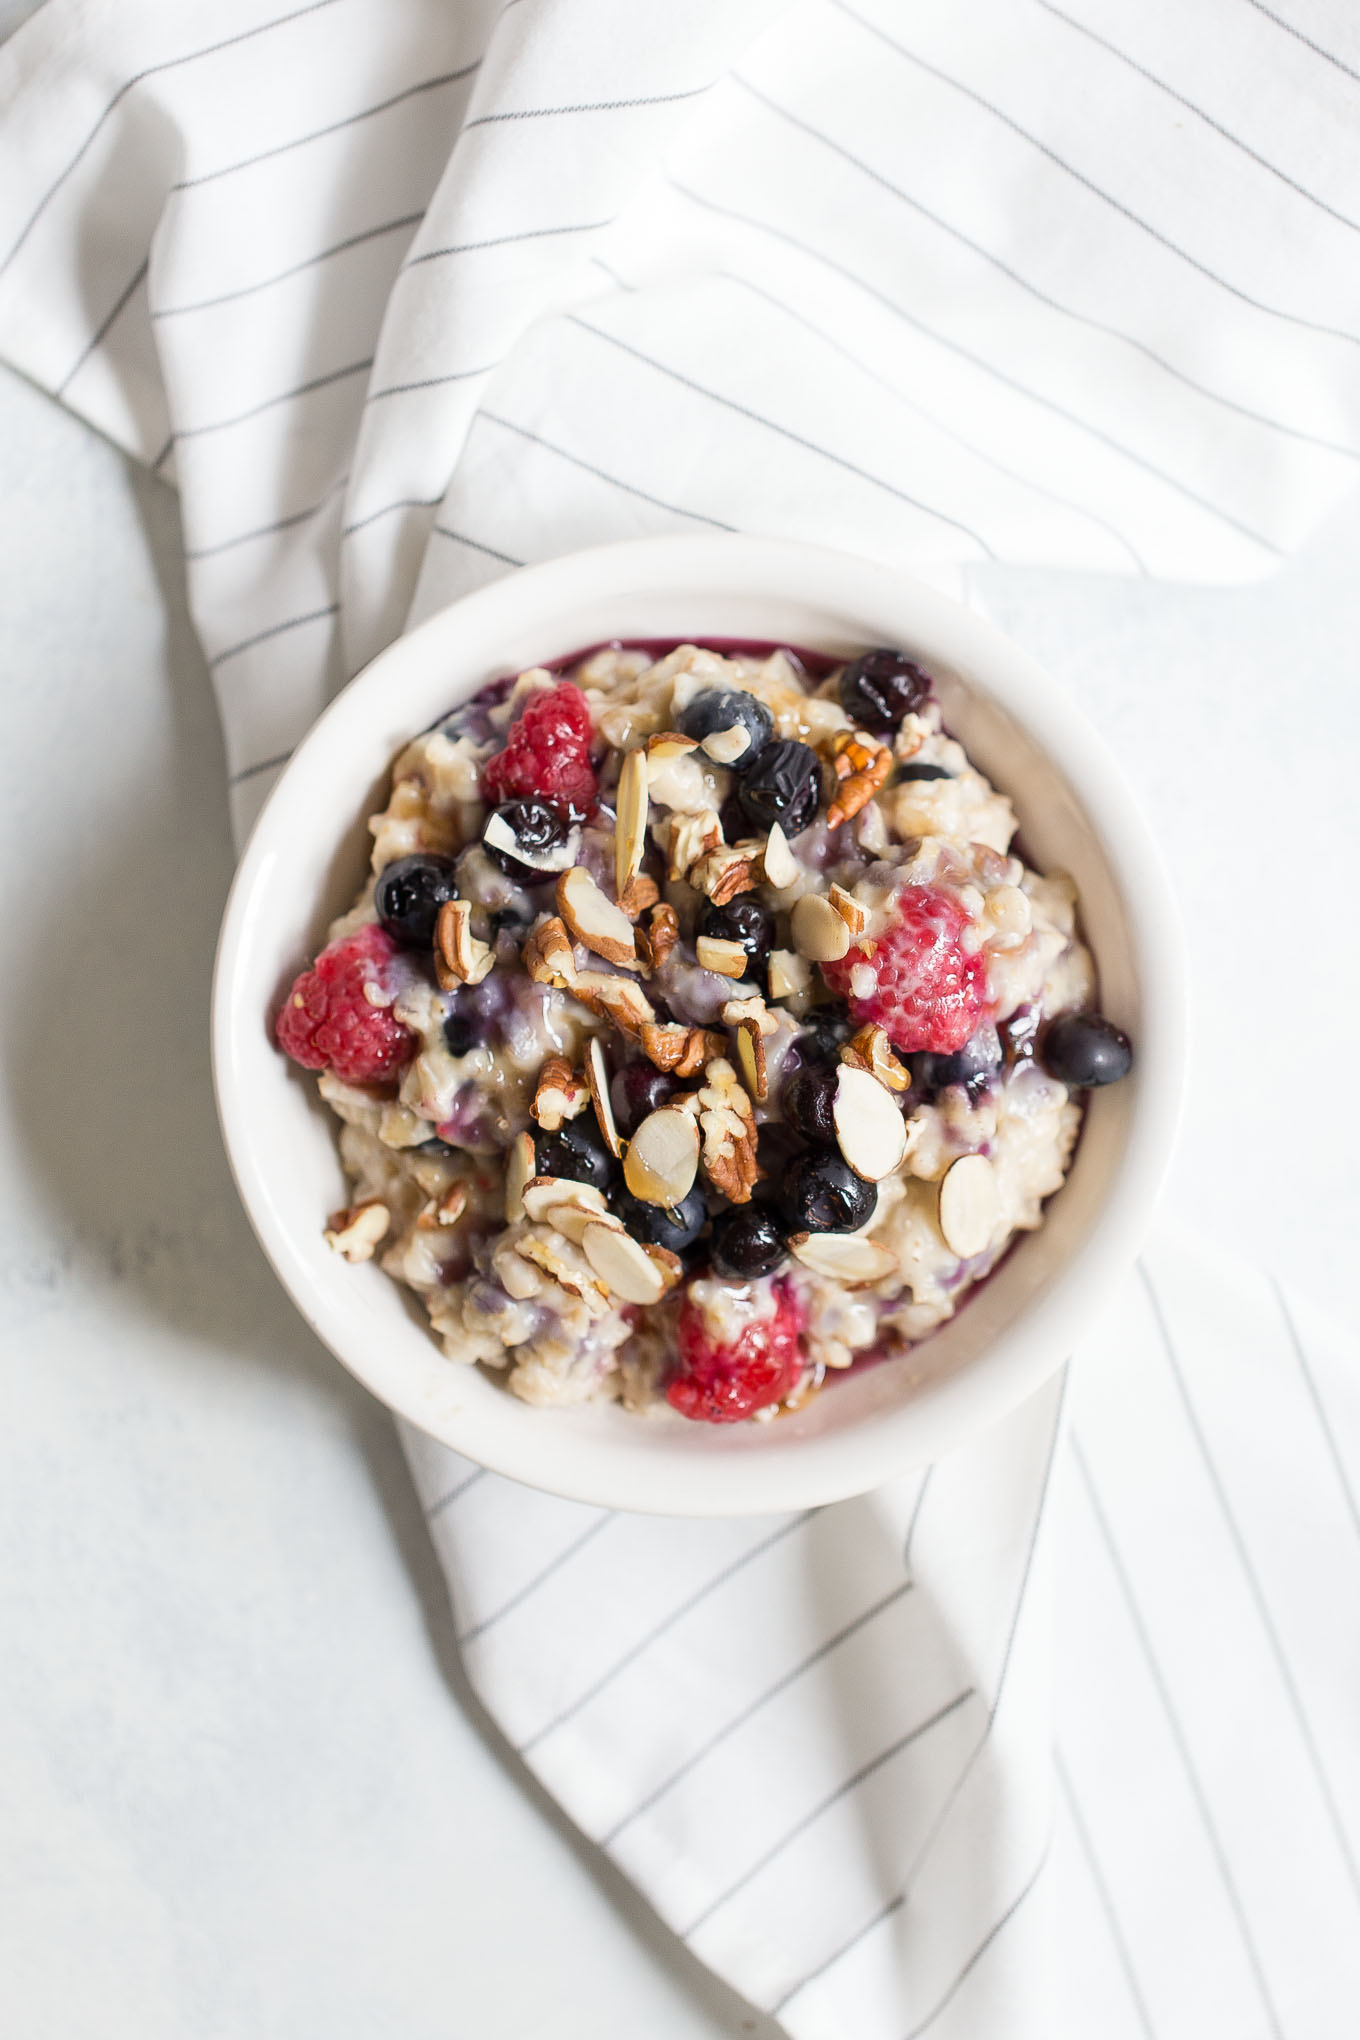 Slow Cooker Oatmeal with Berries, Almonds, and Maple Syrup